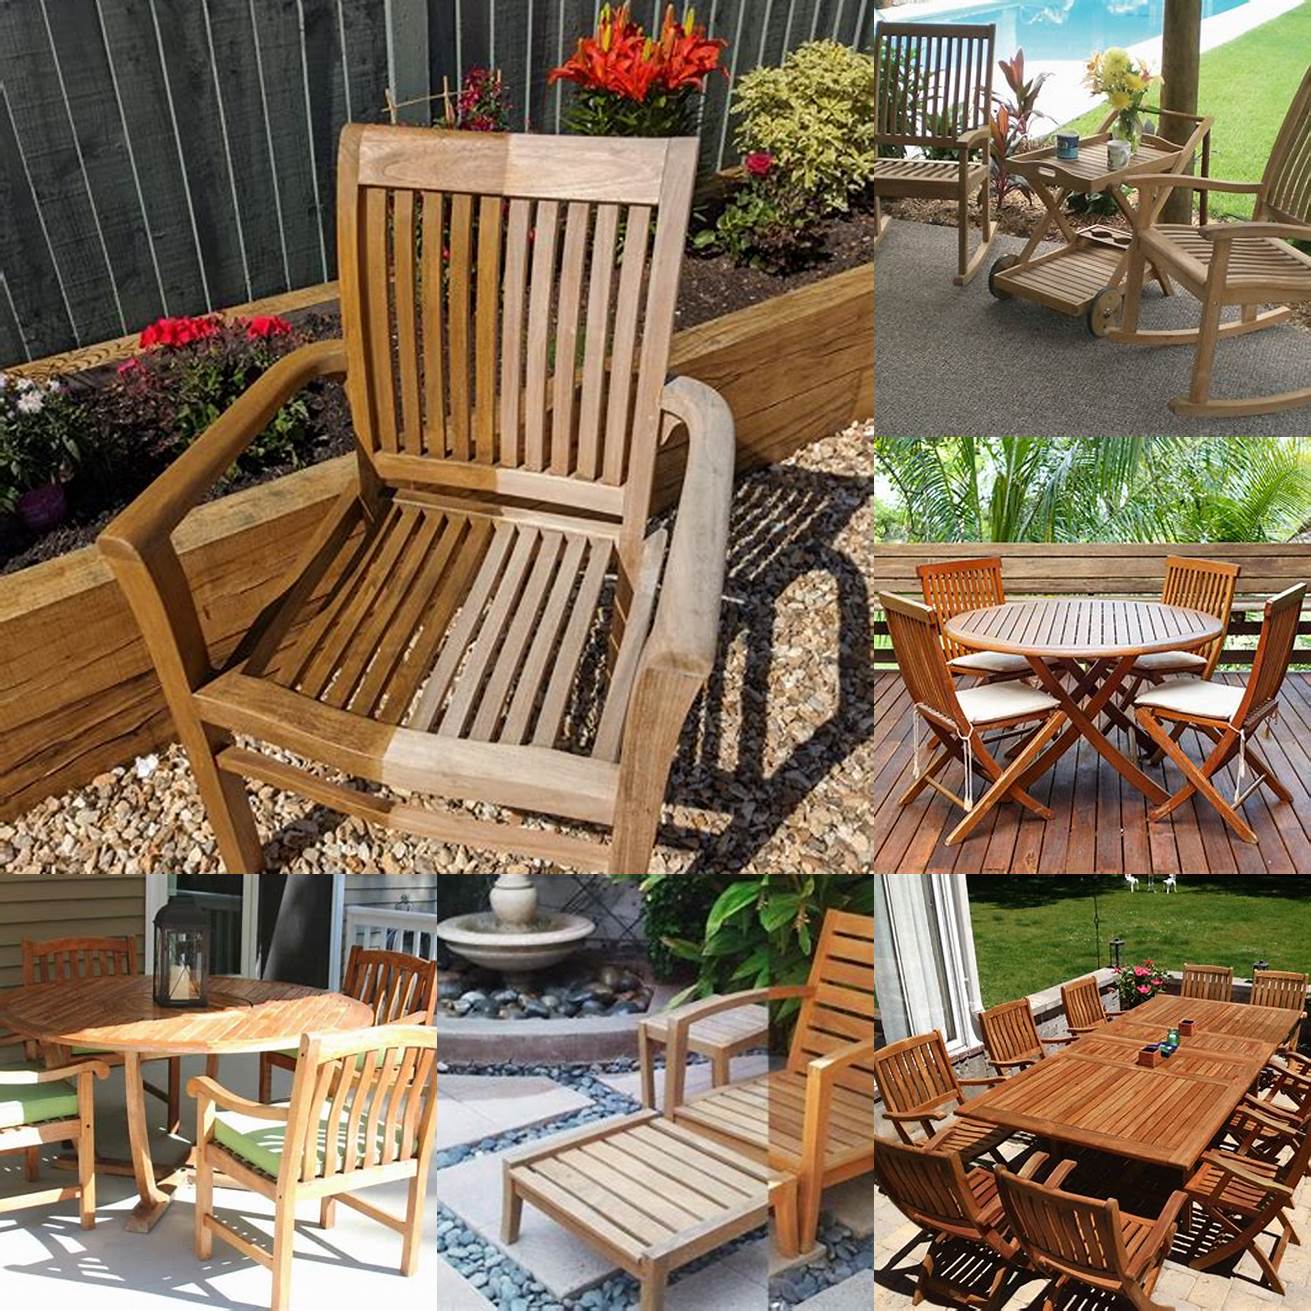 Protect Your Teak Furniture From the Elements